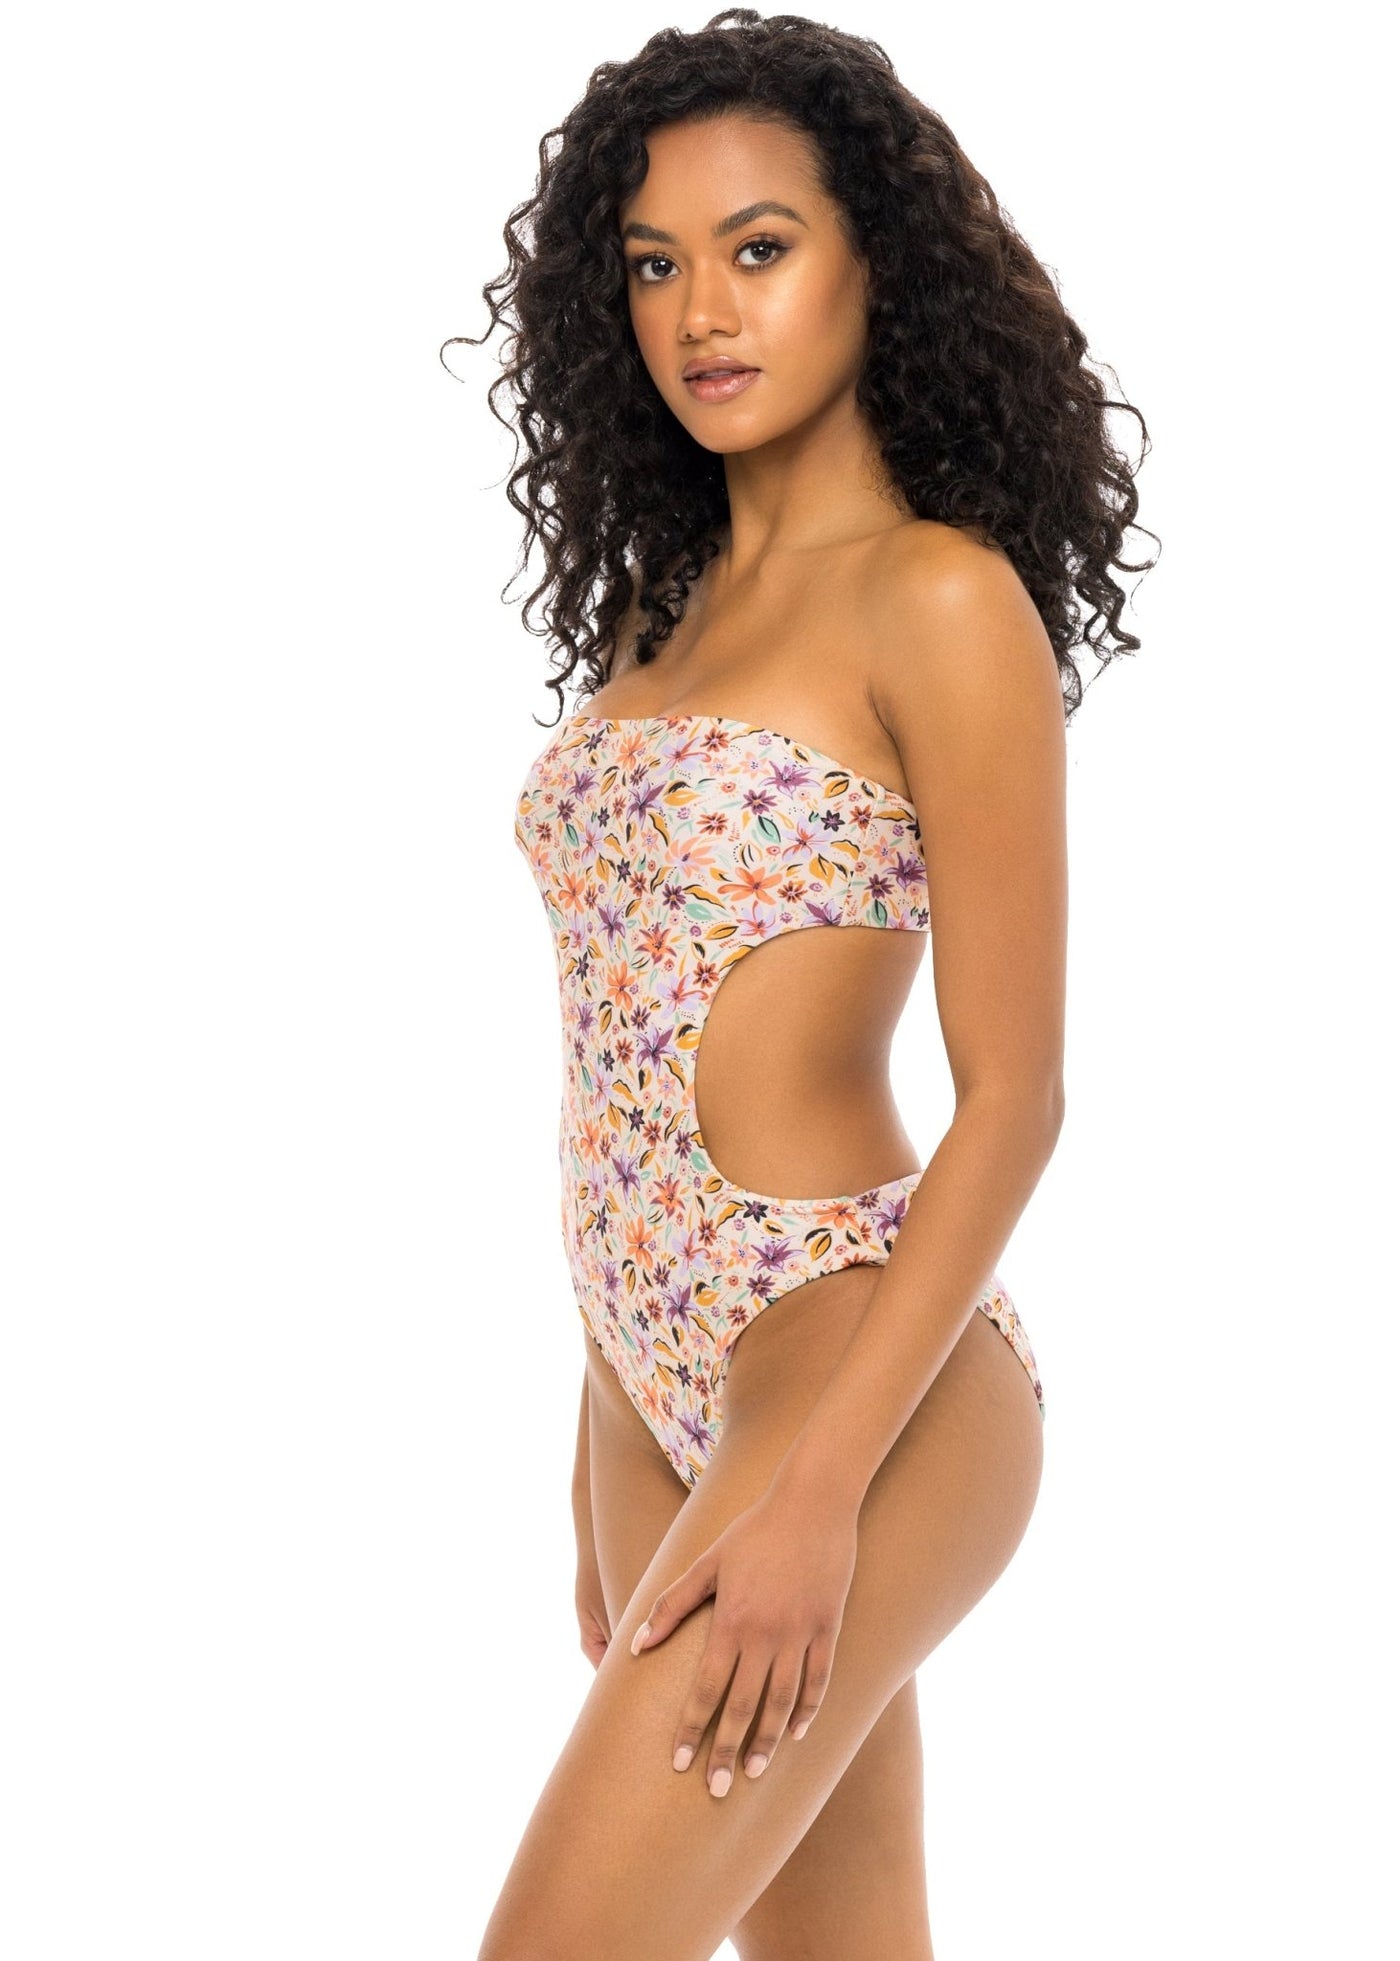 Tokyo Strapless Cut Out One Piece Swimsuit - Cactus Bloom Print - Swim One Piece - JMP The Label